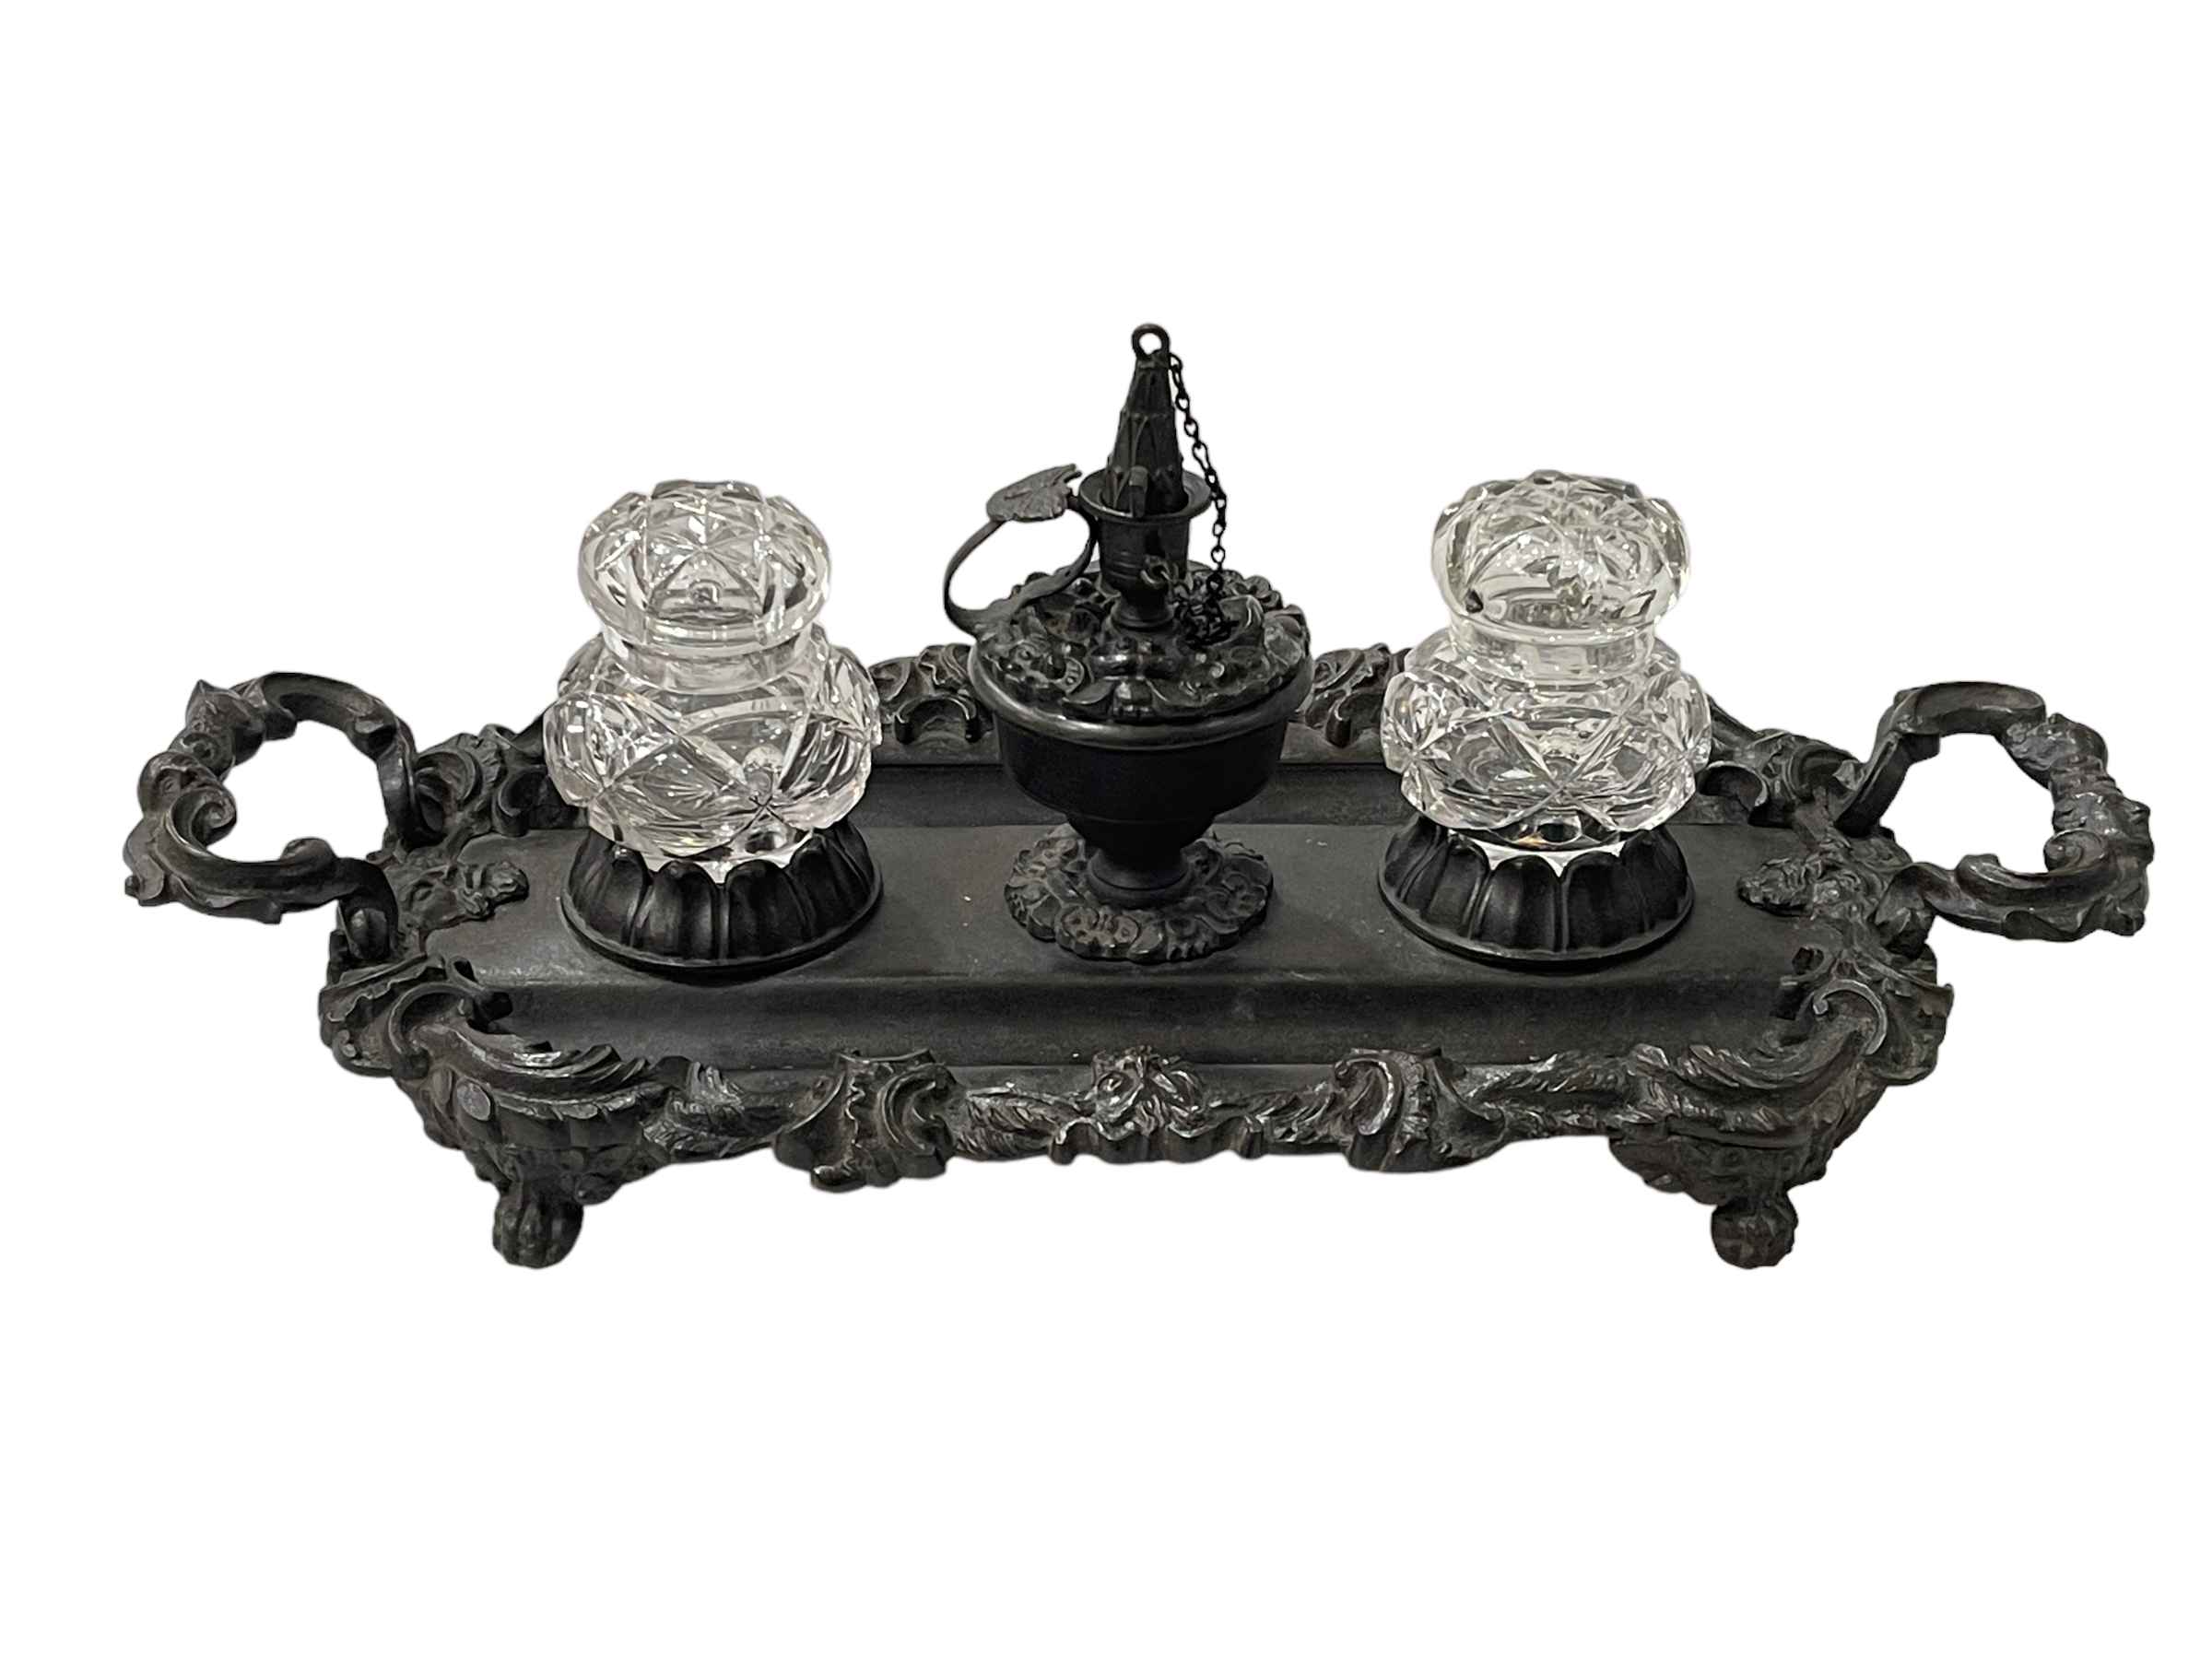 Victorian cast metal ornate inkstand with bottles, 36cm across.